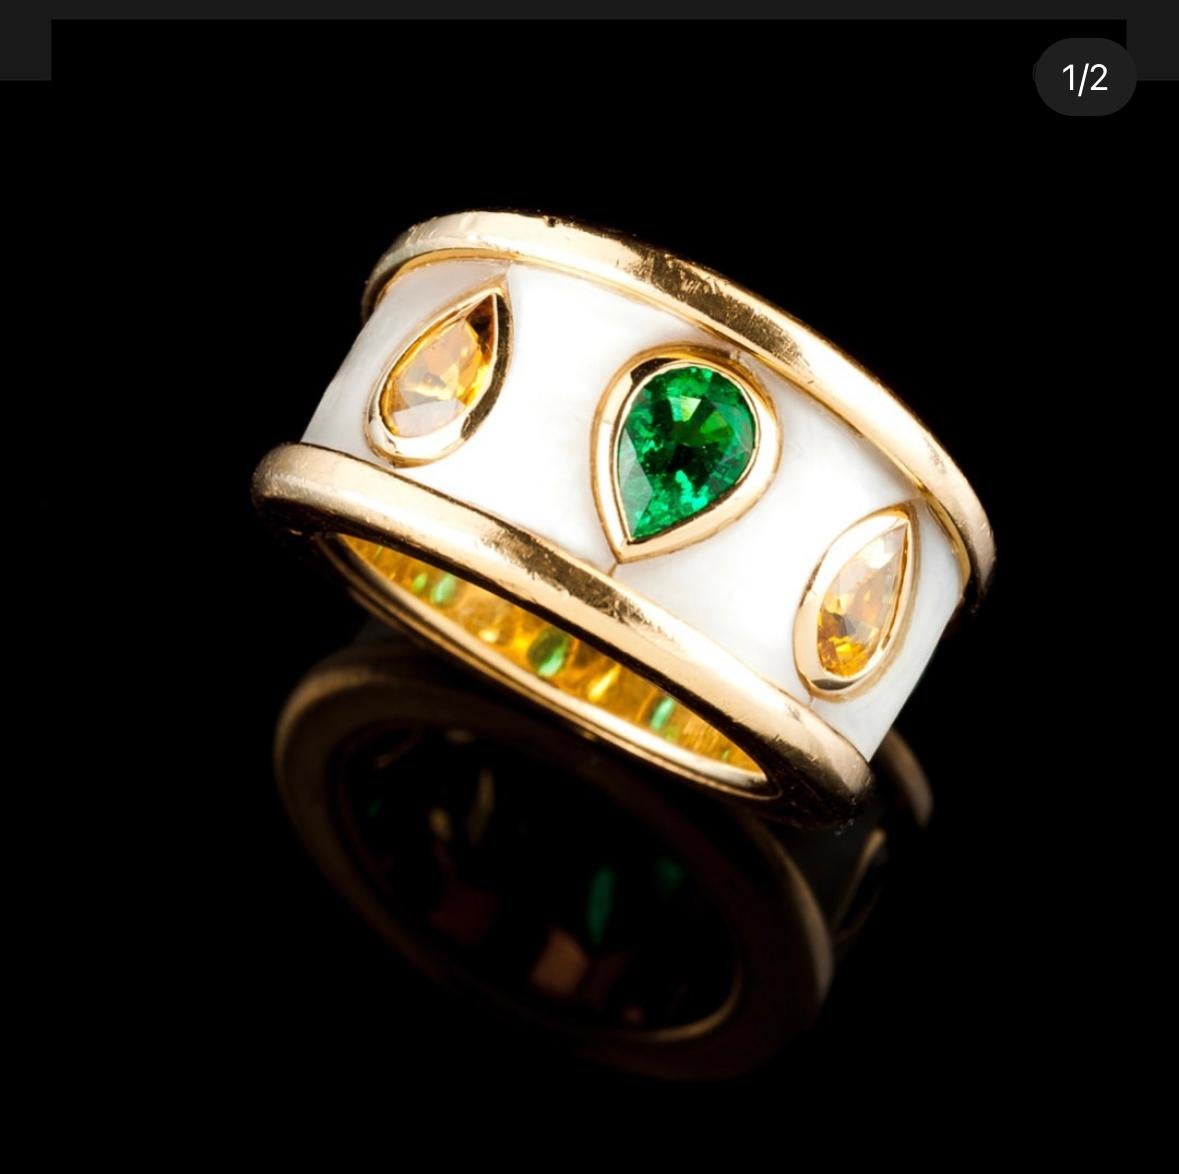 MELLERIO 18k Gold Ring with Emerald, Yellow Sapphire and Mother-of-Pearl.

Size:
US 6.5
UK M
53 mm